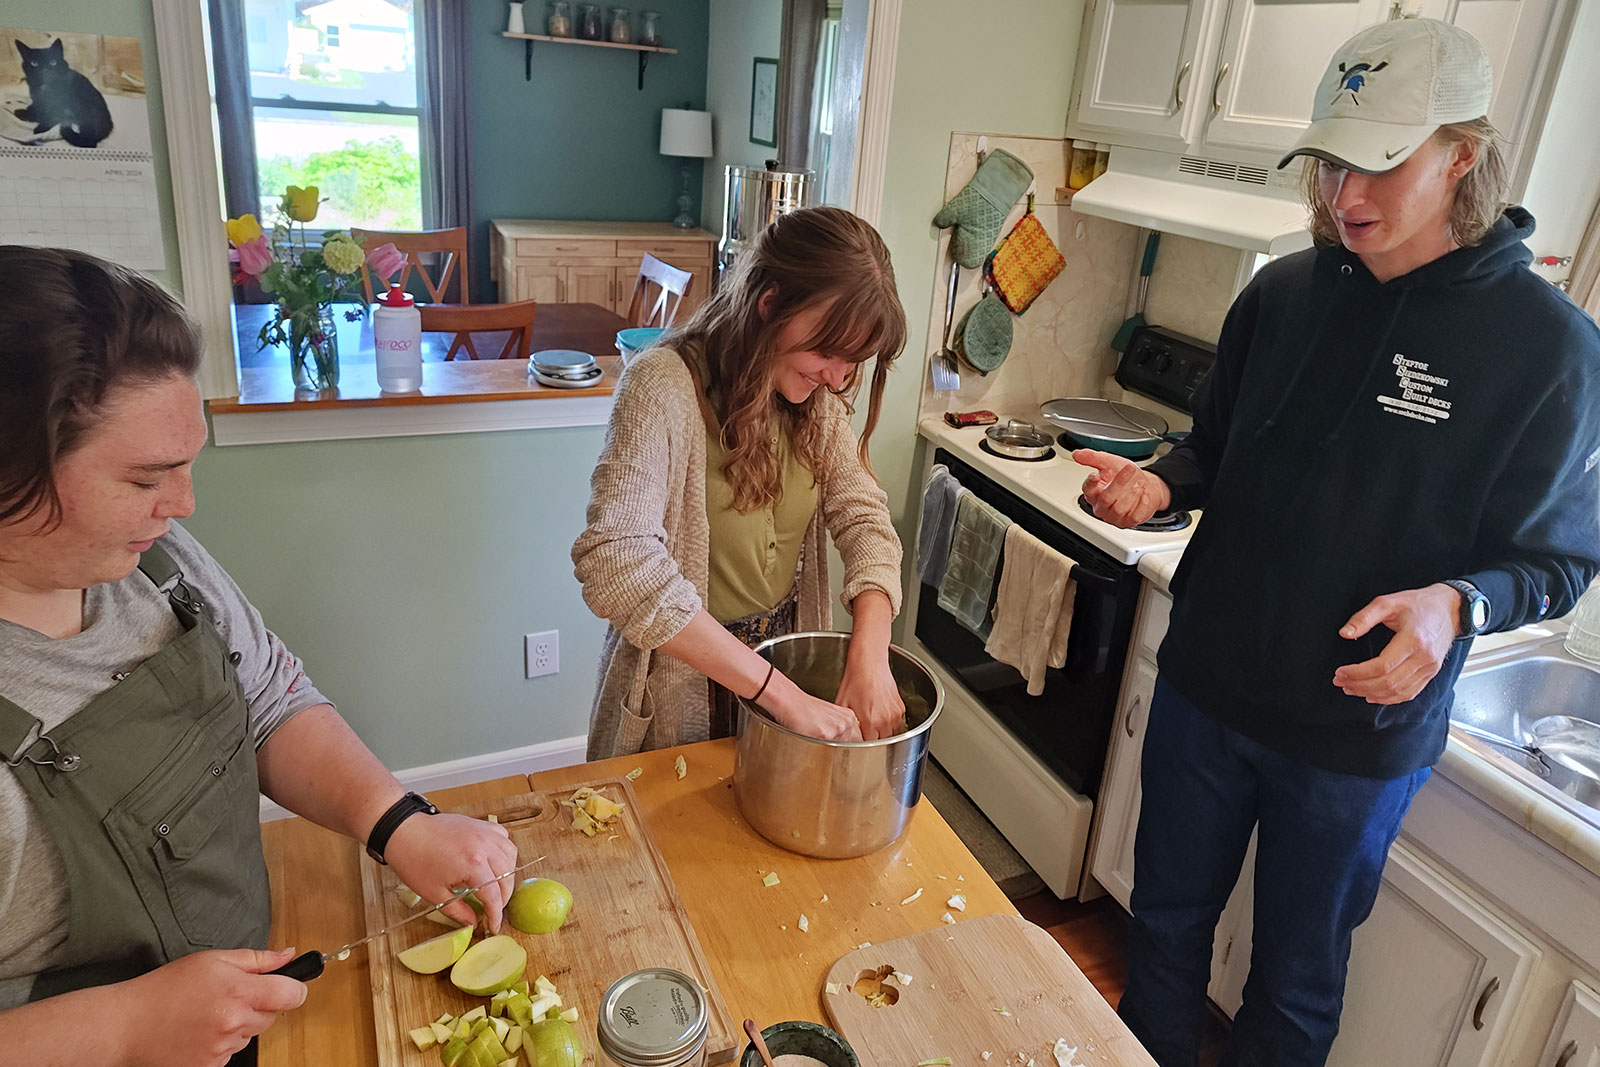 Permaculture Interns preparing food for the May Day Celebration